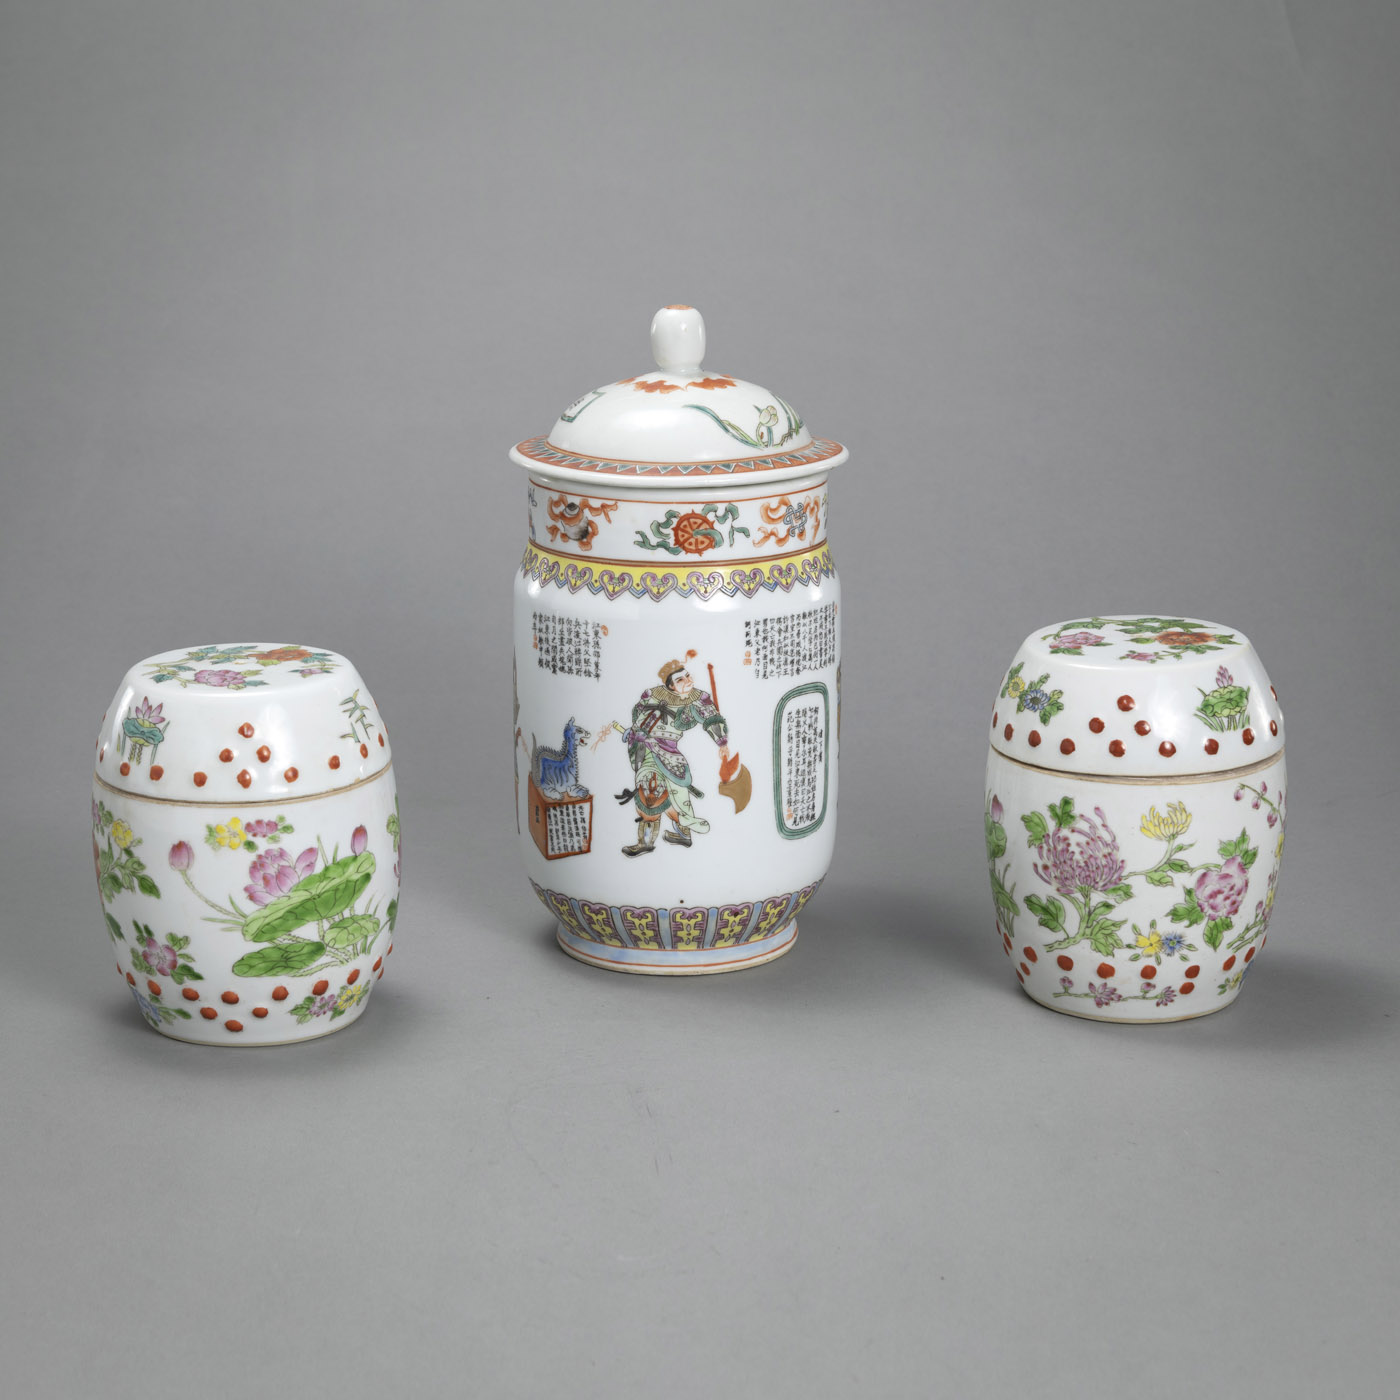 <b>THREE LIDDED 'FAMILLE ROSE' PORCELAIN VESSELS, ONE WITH 'WU SHUANG PU' FIGURES</b>